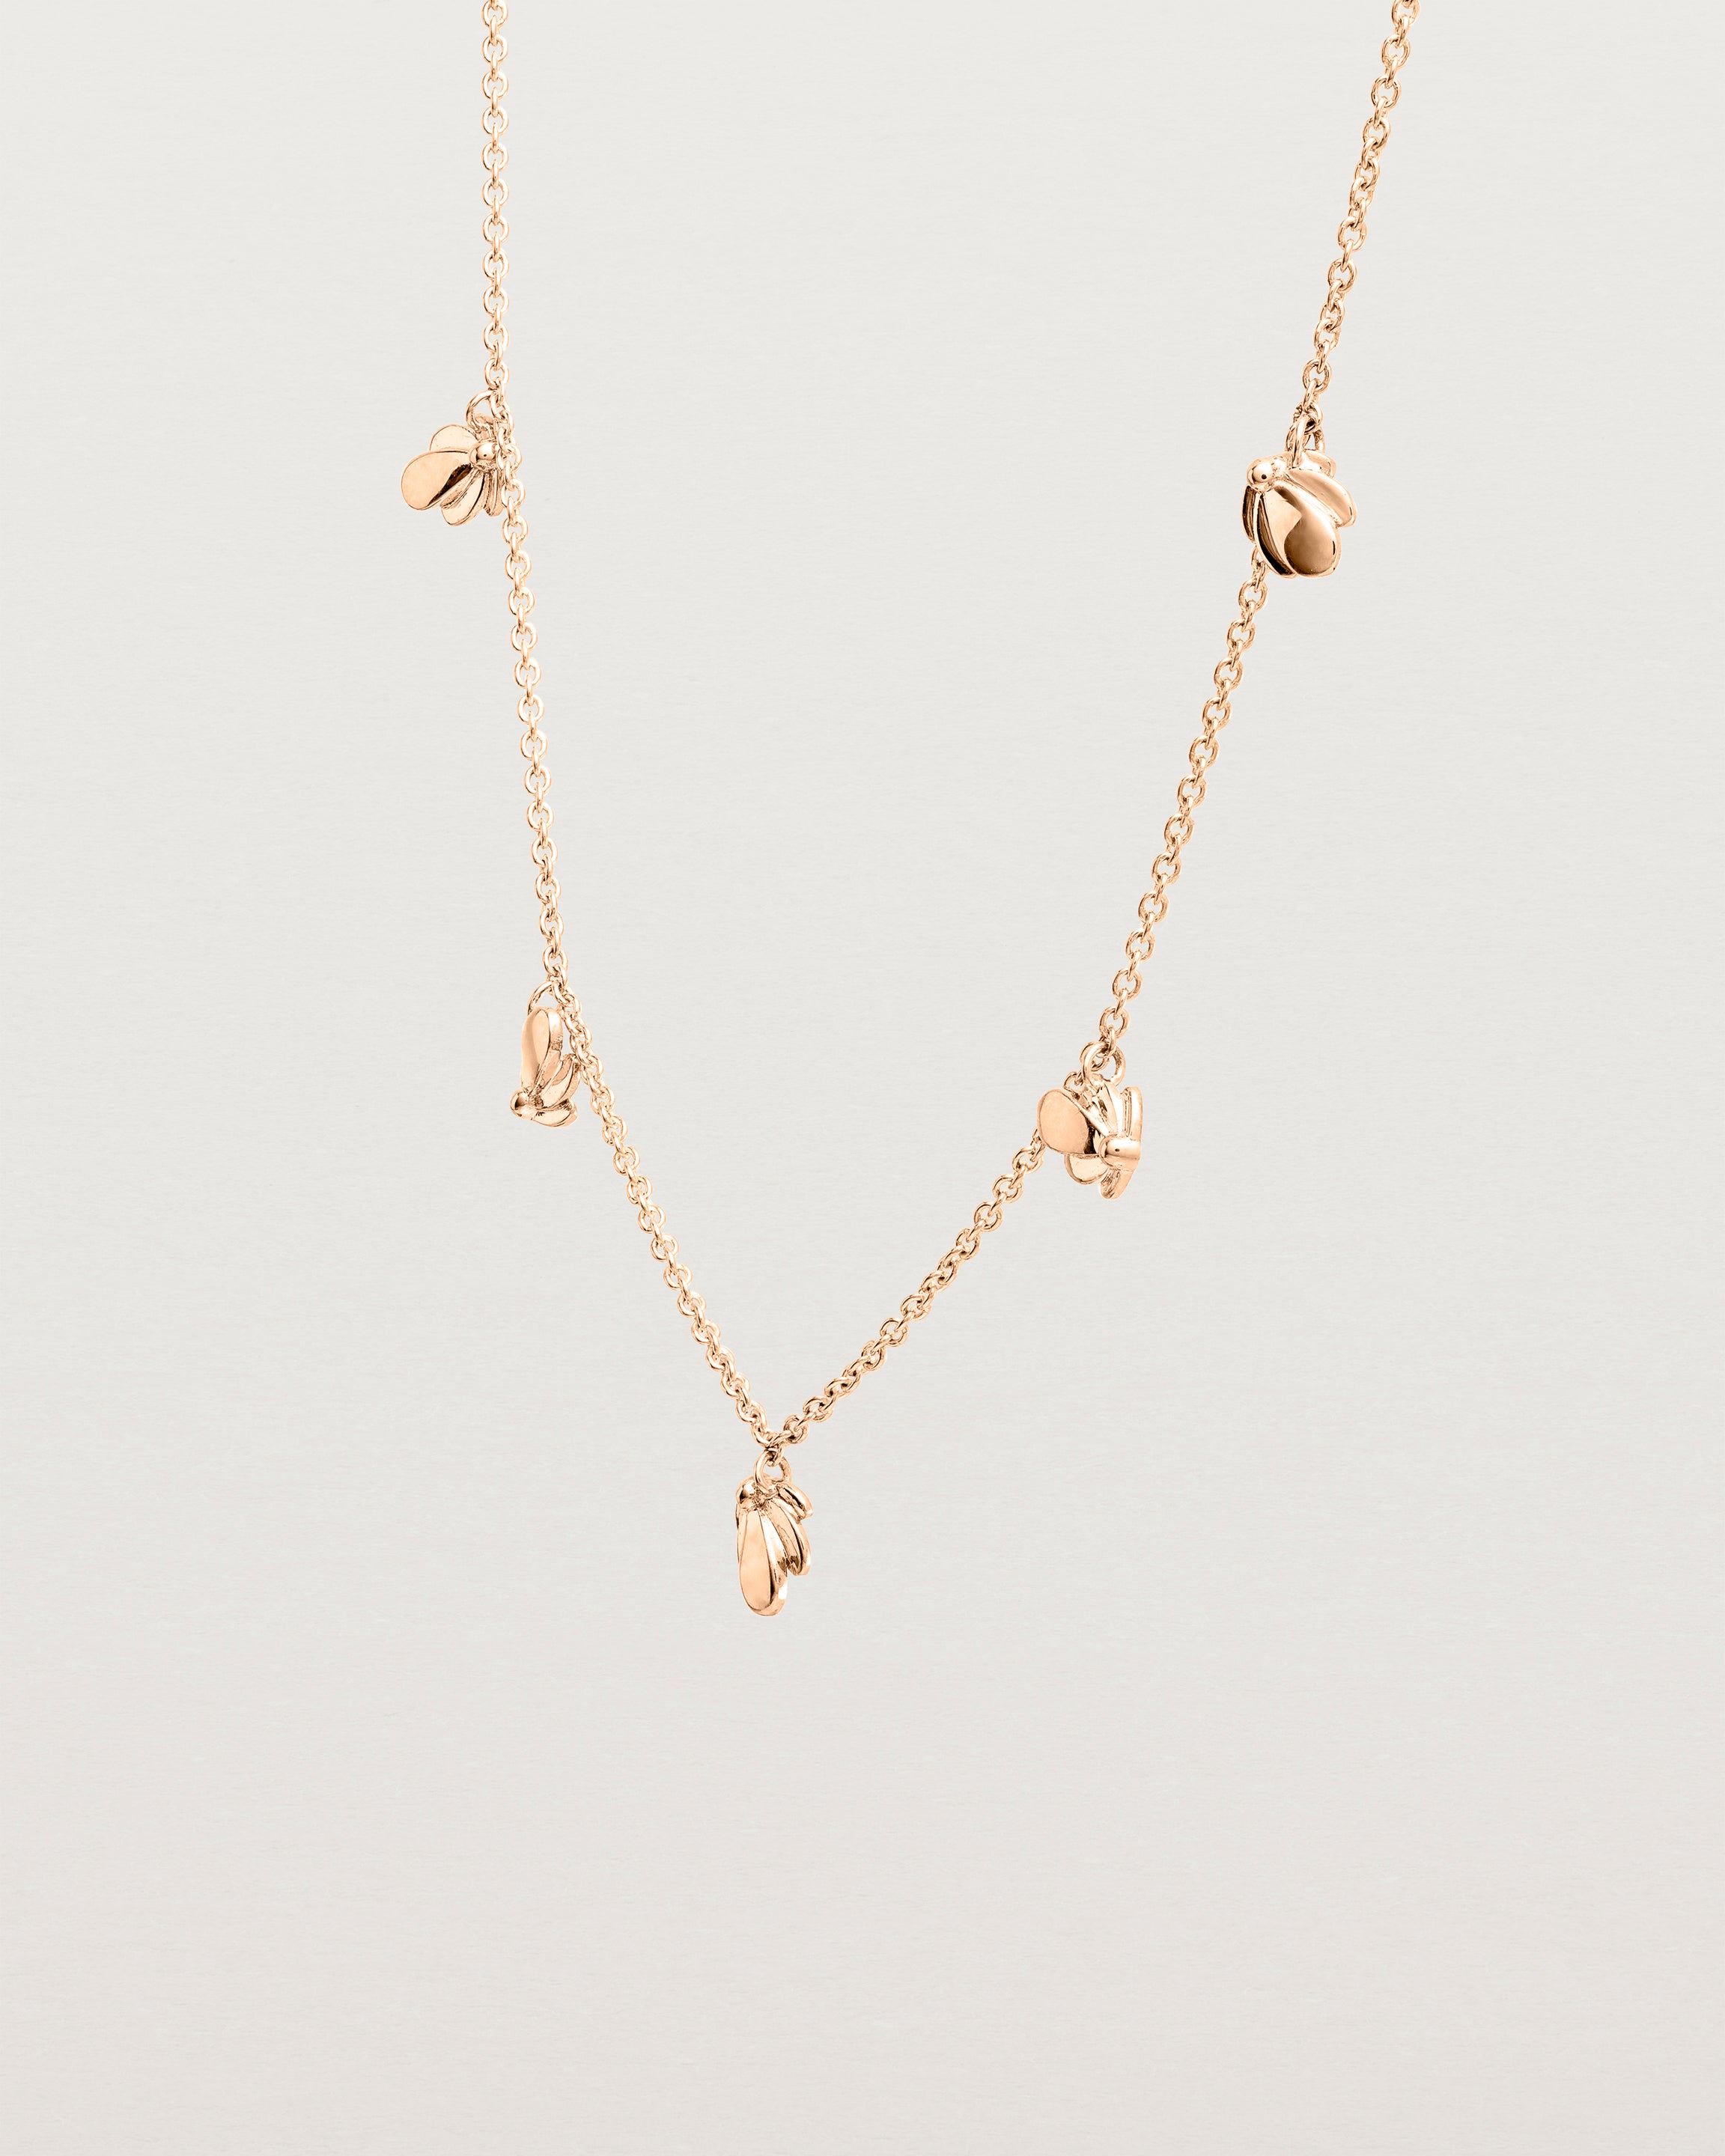 Angled view of the Aeris Charm Necklace in Rose Gold.